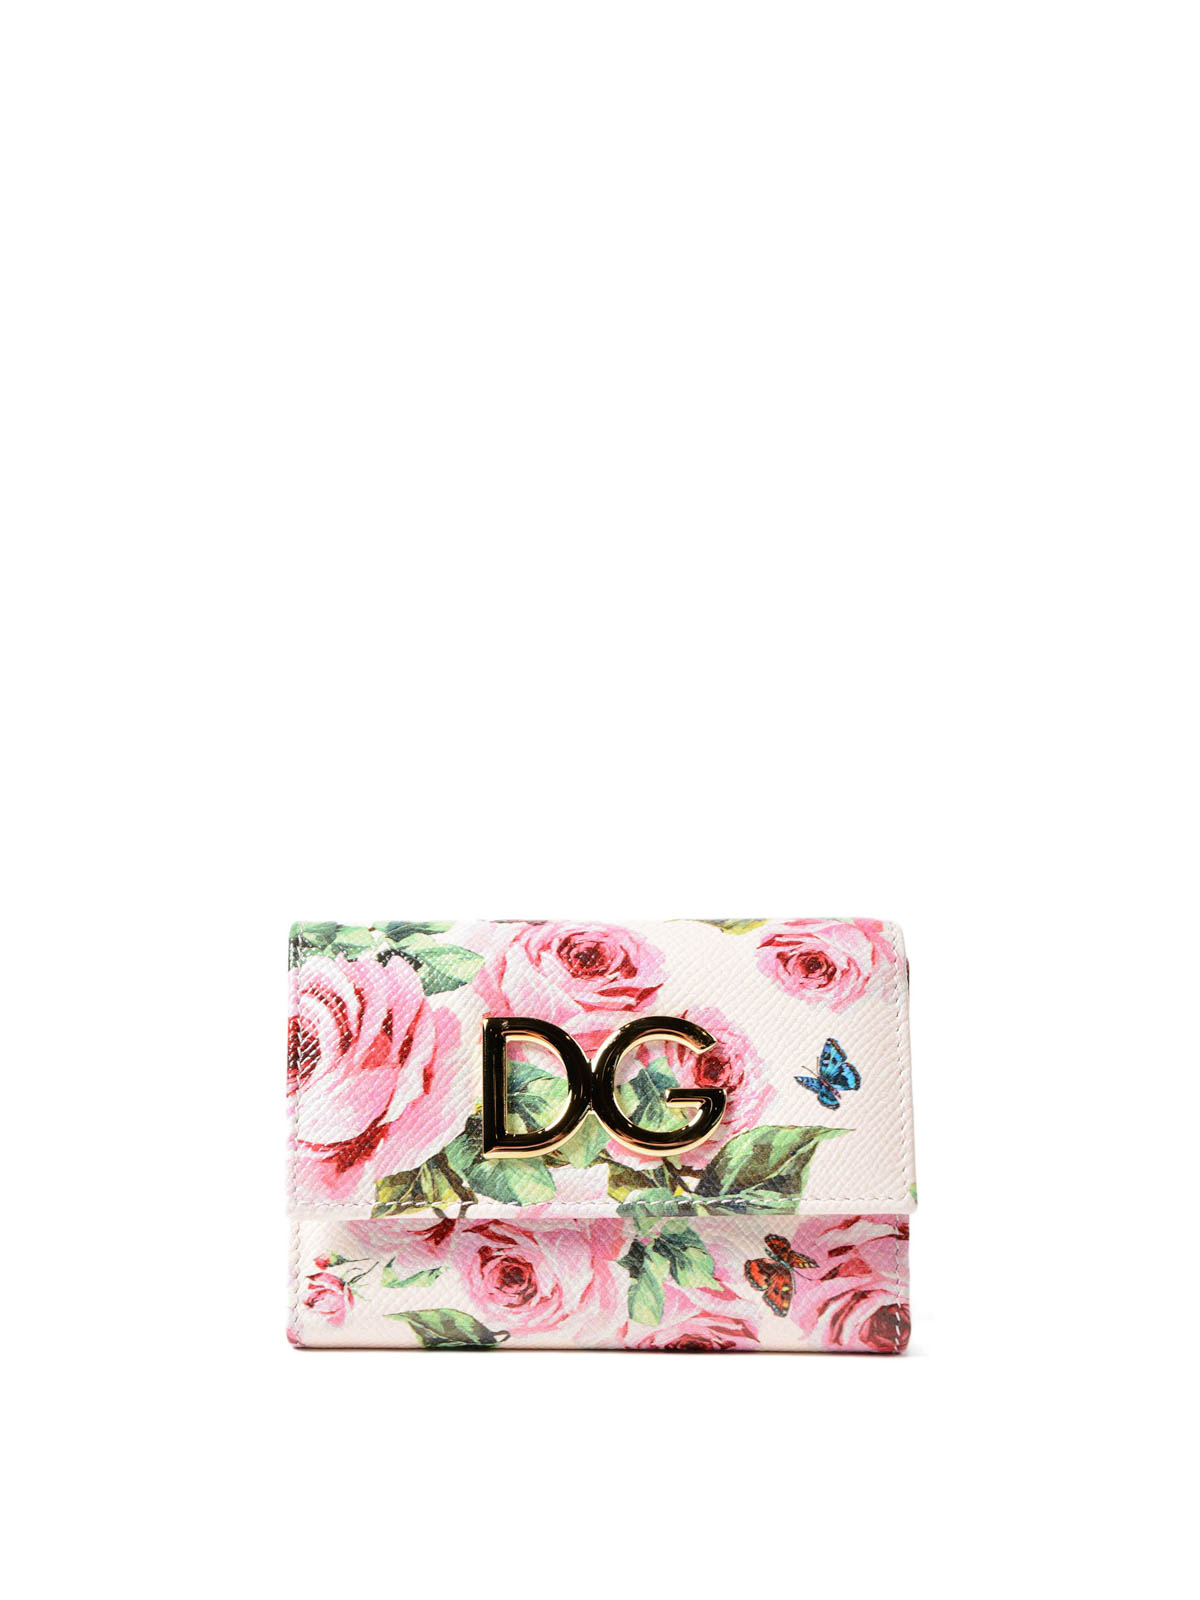 Dolce & Gabbana Dauphine French-Flap Leather Wallet